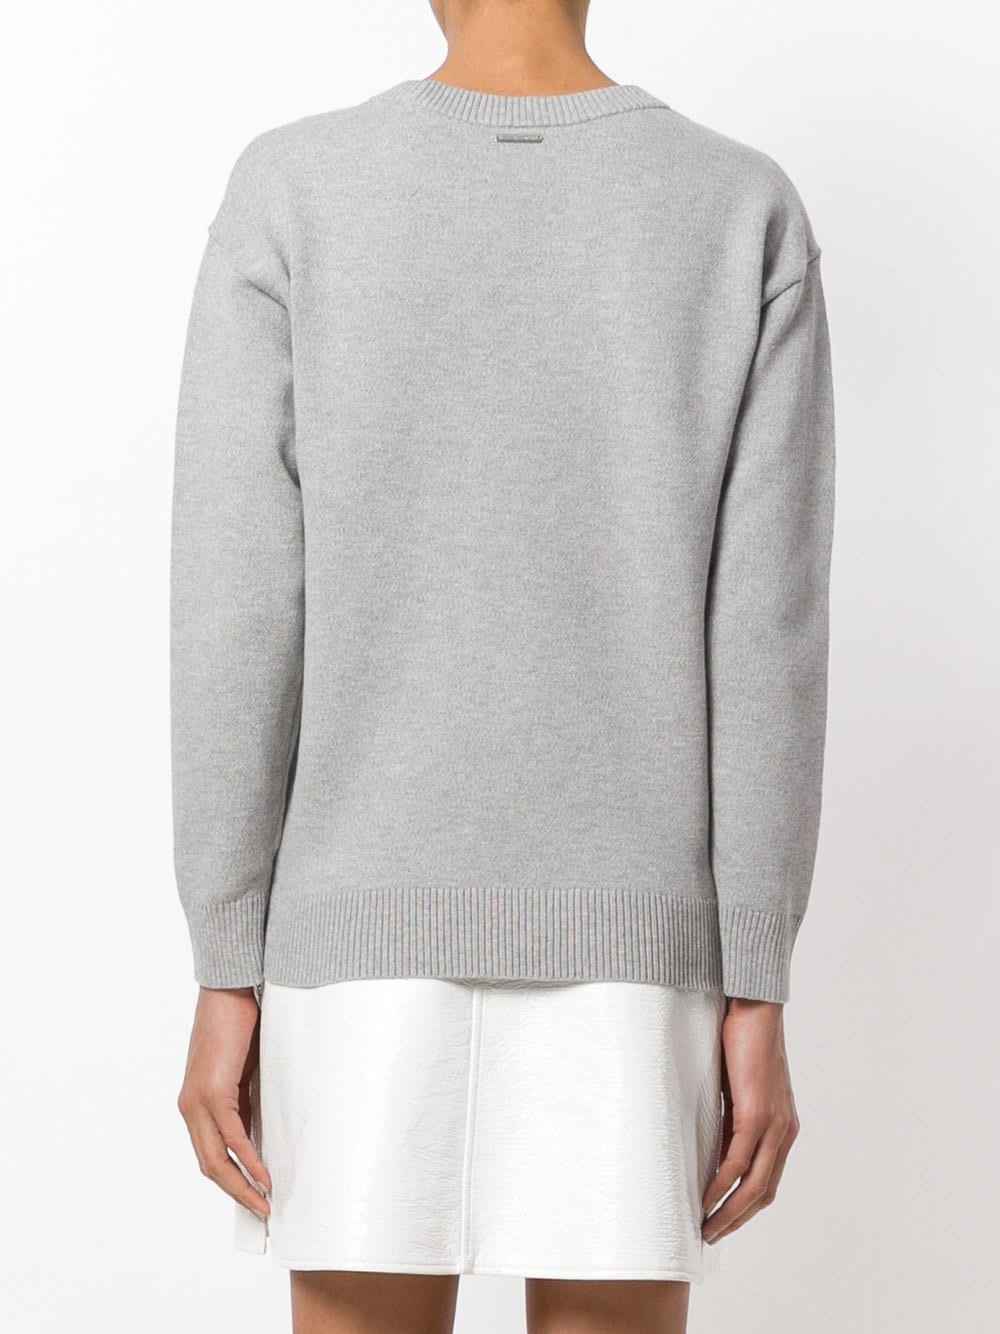 michael kors mk WOMAN SWEATER available on montiboutique.com - 23956